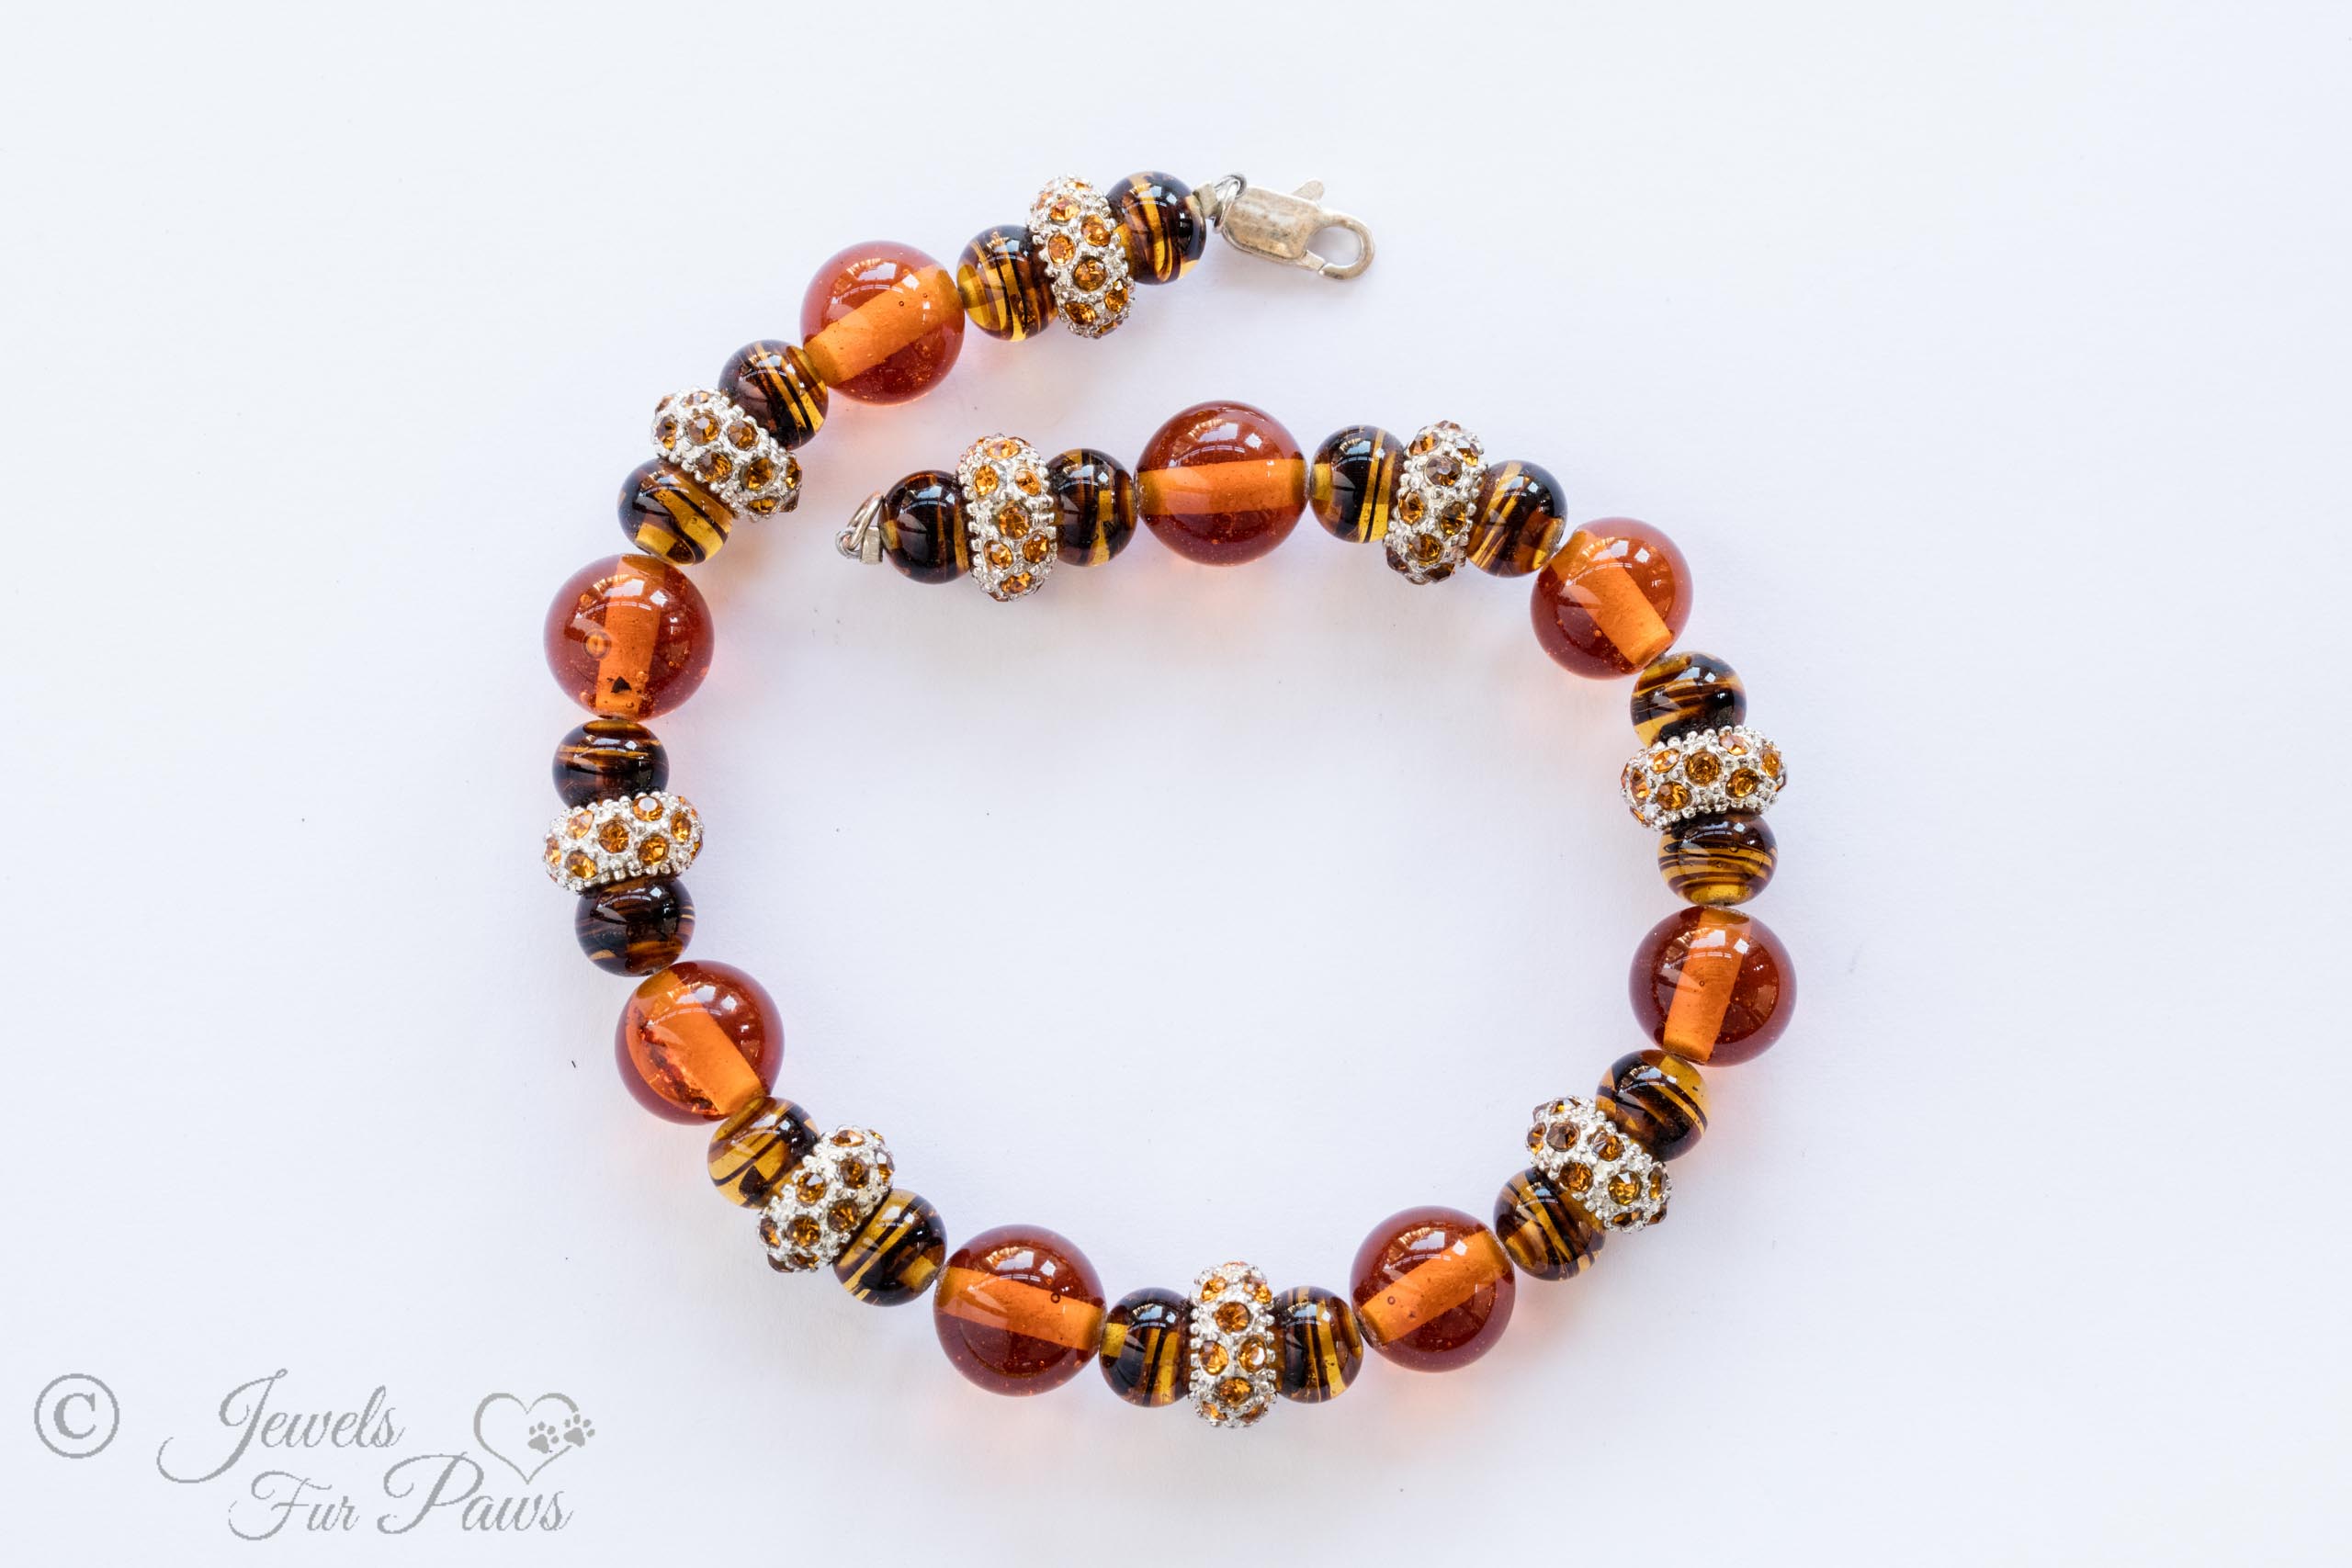 Amber Czech crystal beads with pave Czech crystal beads dog necklace for small dogs with tigers eye crystals